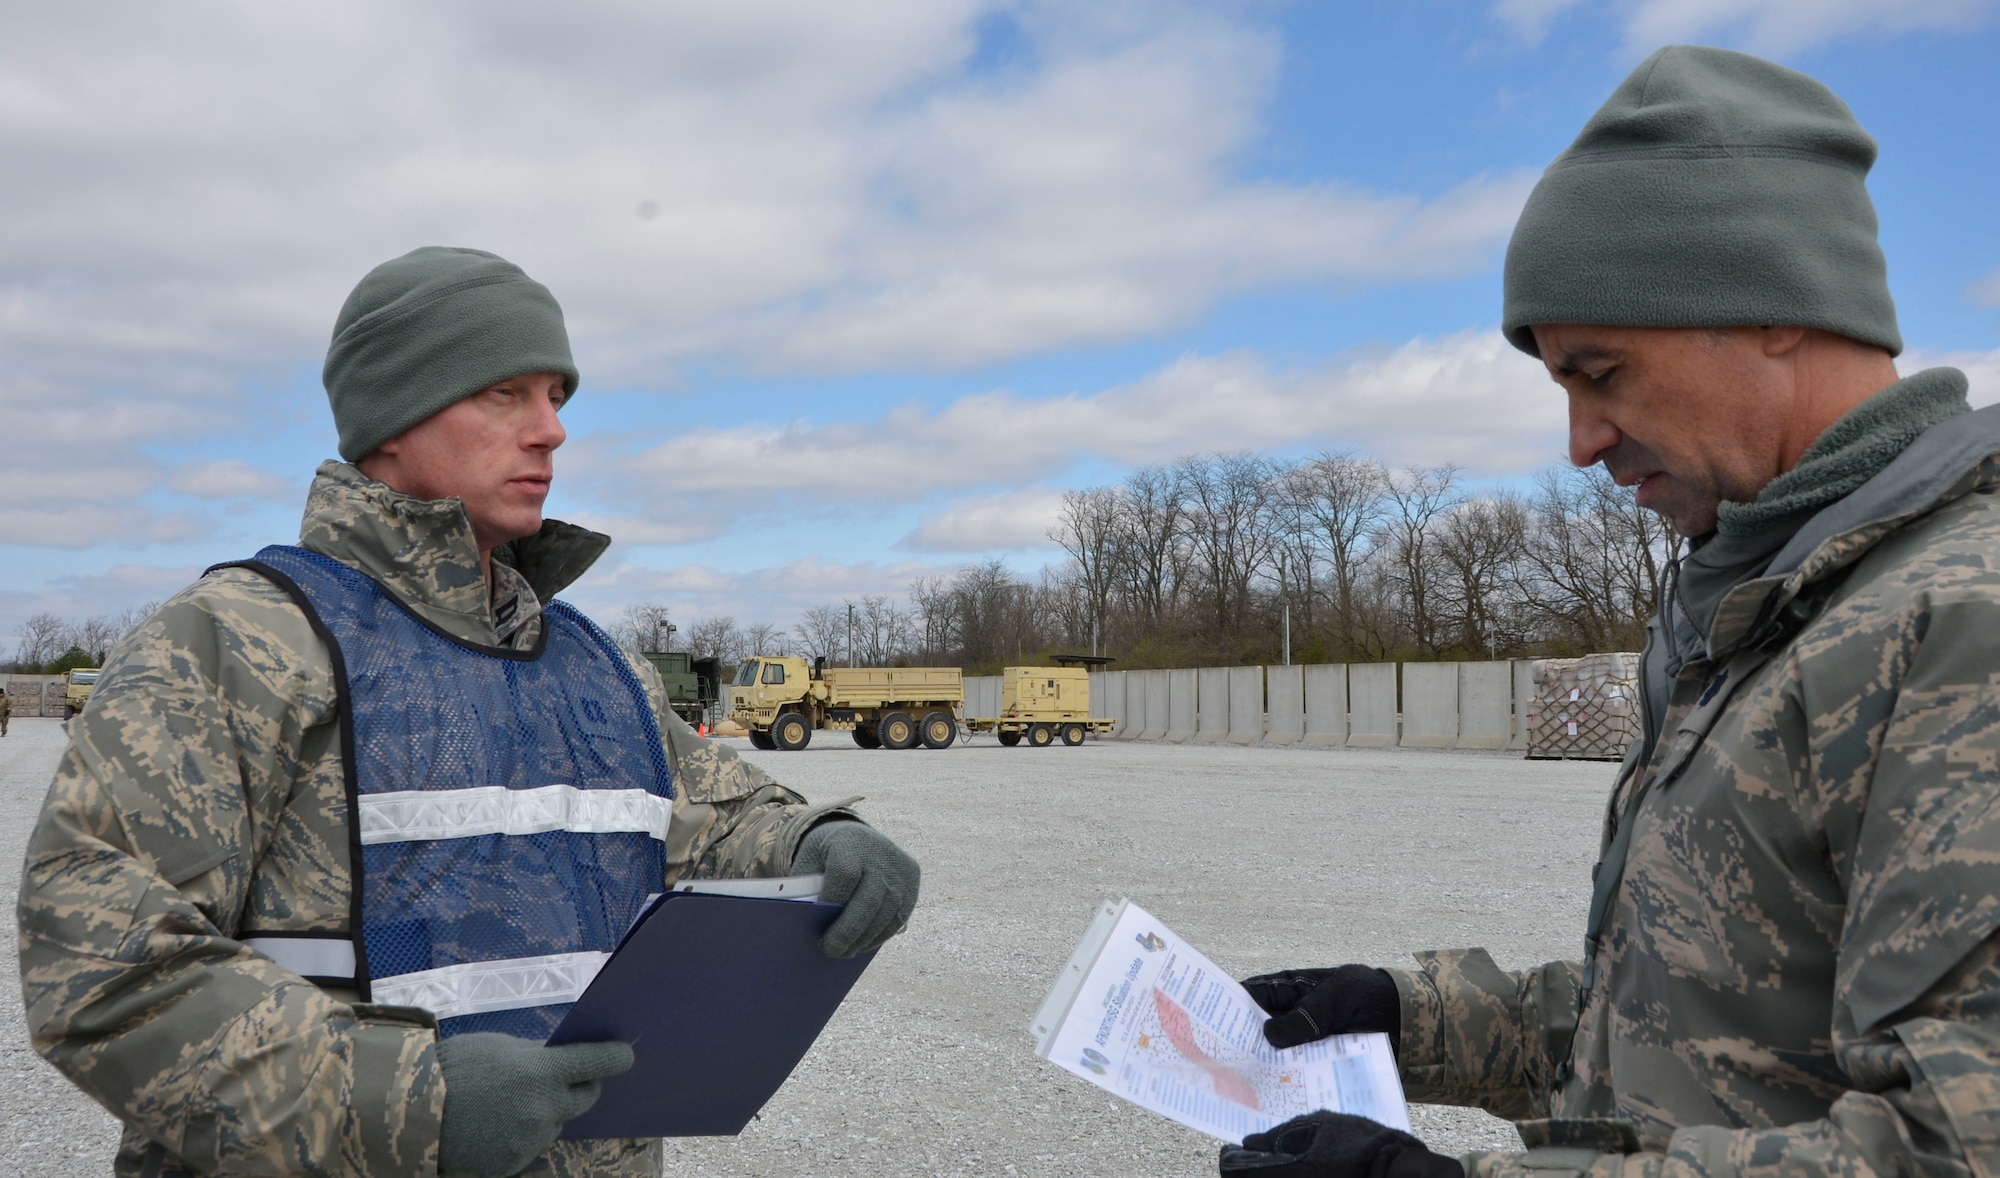 Capt. Lee Laughridge, Air Forces Northern Medical Operations and Training chief, discusses the exercise scenario with Lt. Col. Jack Vilardi, 81st Medical Group operations officer, during the Expeditionary Medical Support field confirmation exercise at Camp Atterbury, Indiana, April 17, 2018. The confirmation exercise evaluated the tactics, techniques and procedures of EMEDS operations during a domestic U.S. contingency such as a natural disaster. (U.S. Air Force photo by Mary McHale)